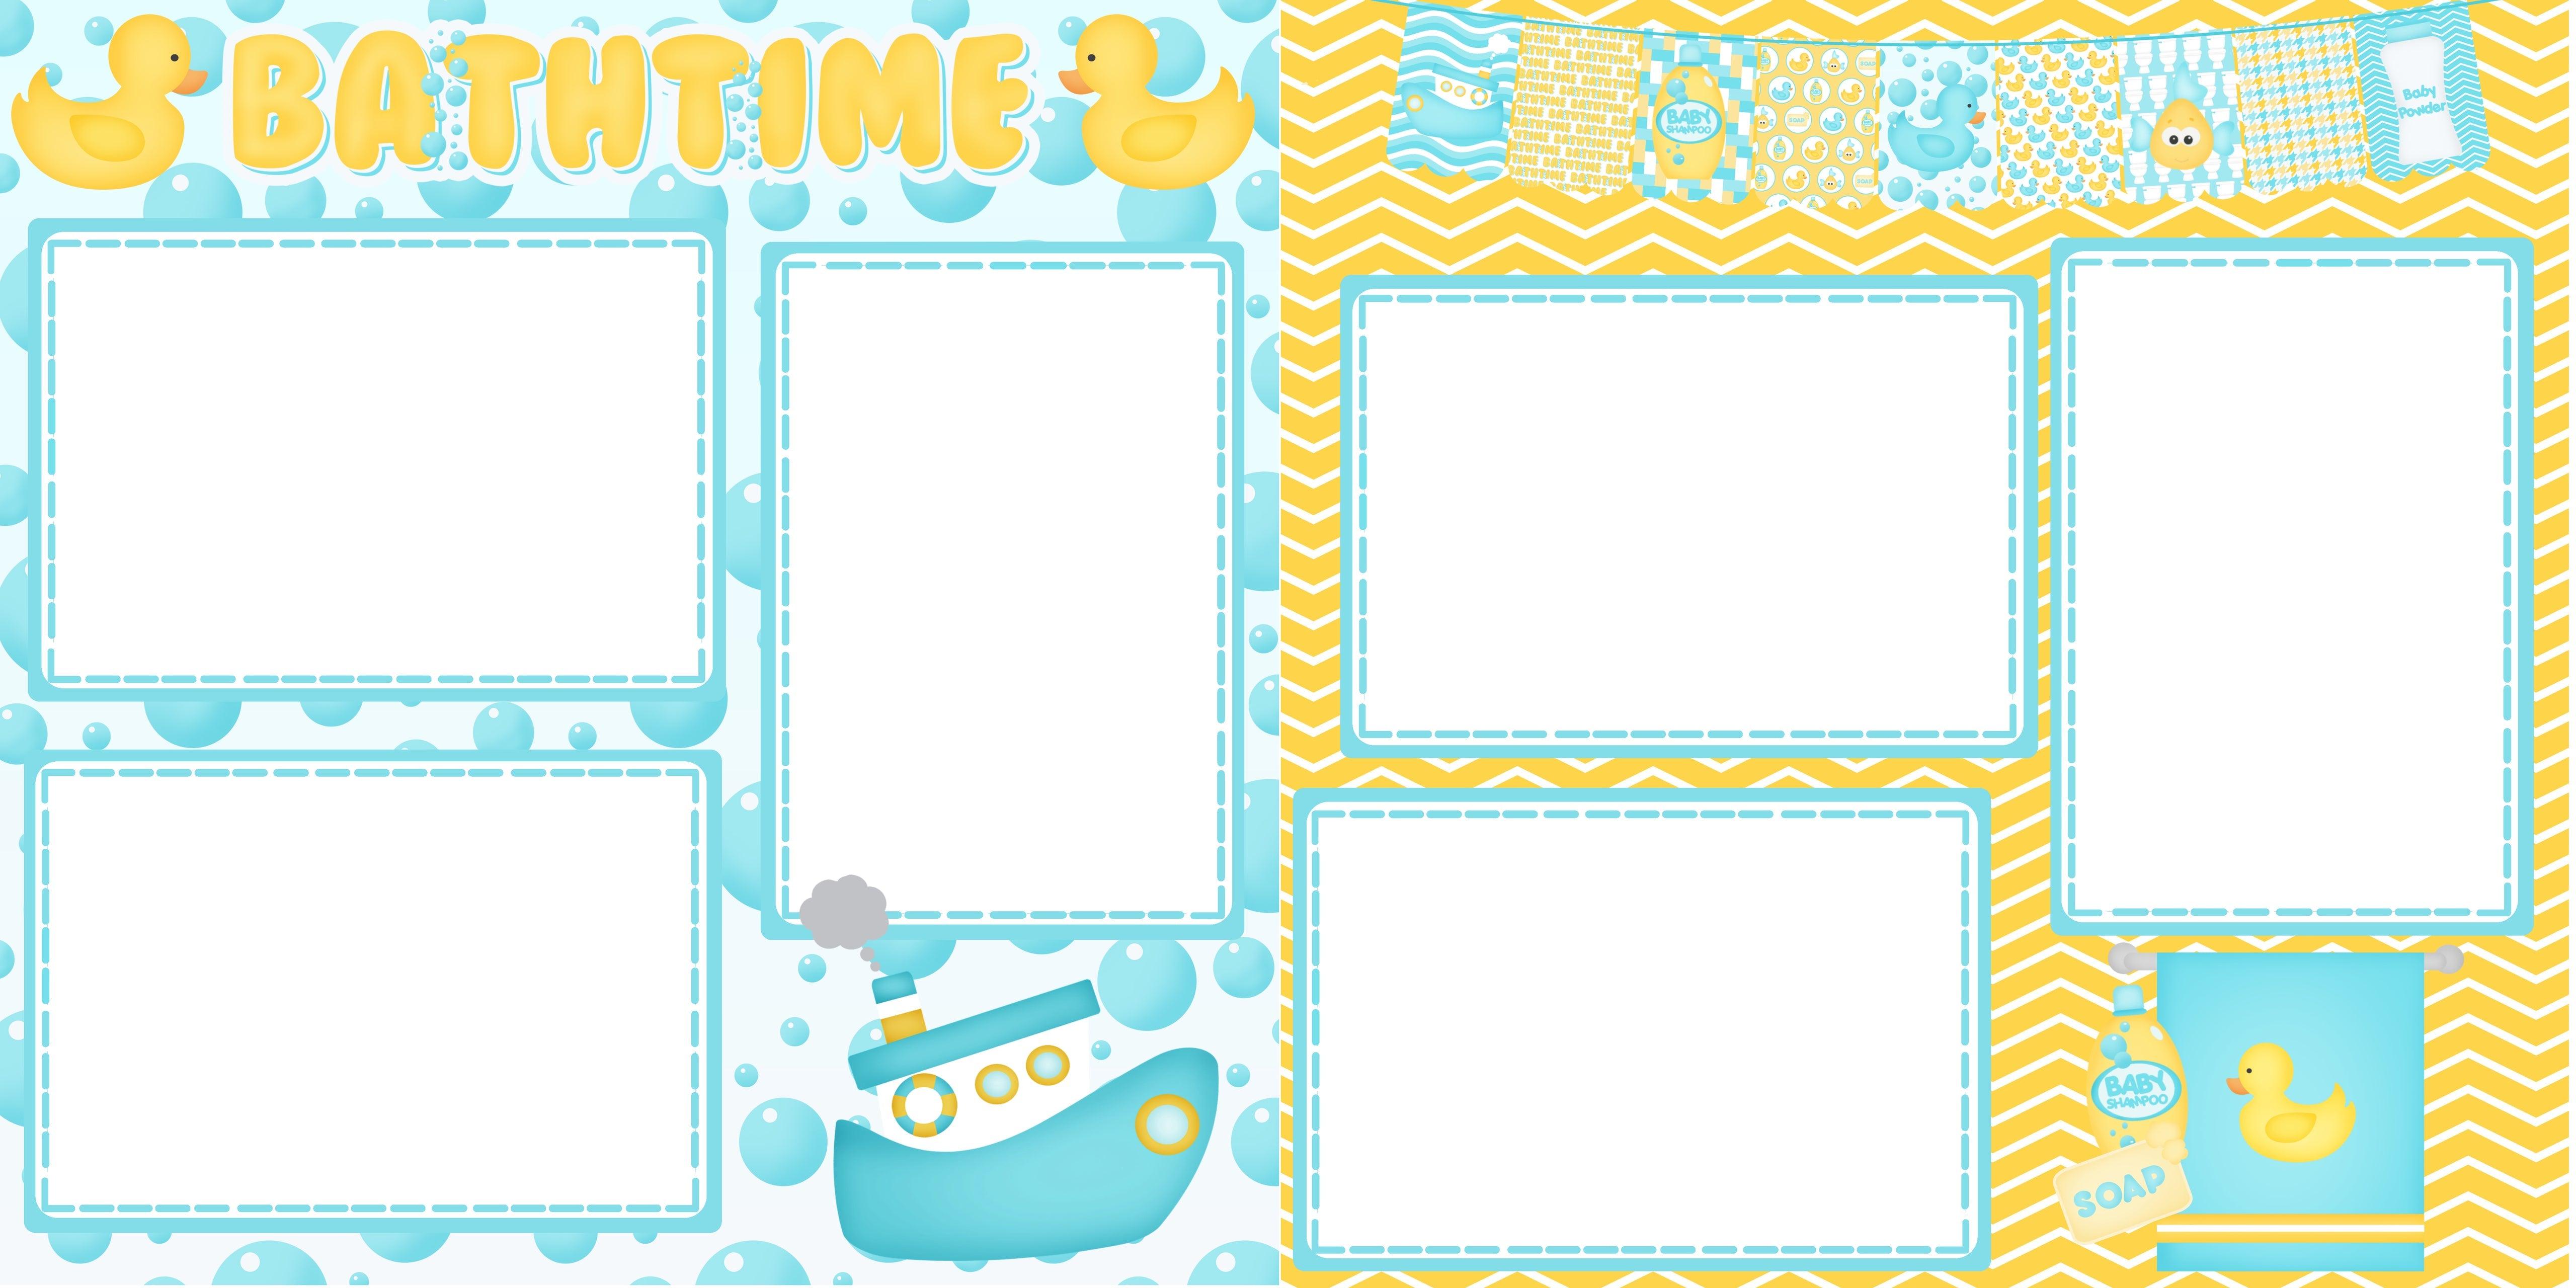 Bathtub Time Boy Collection Bath Time (2) - 12 x 12 Premade, Printed Scrapbook Pages by SSC Designs